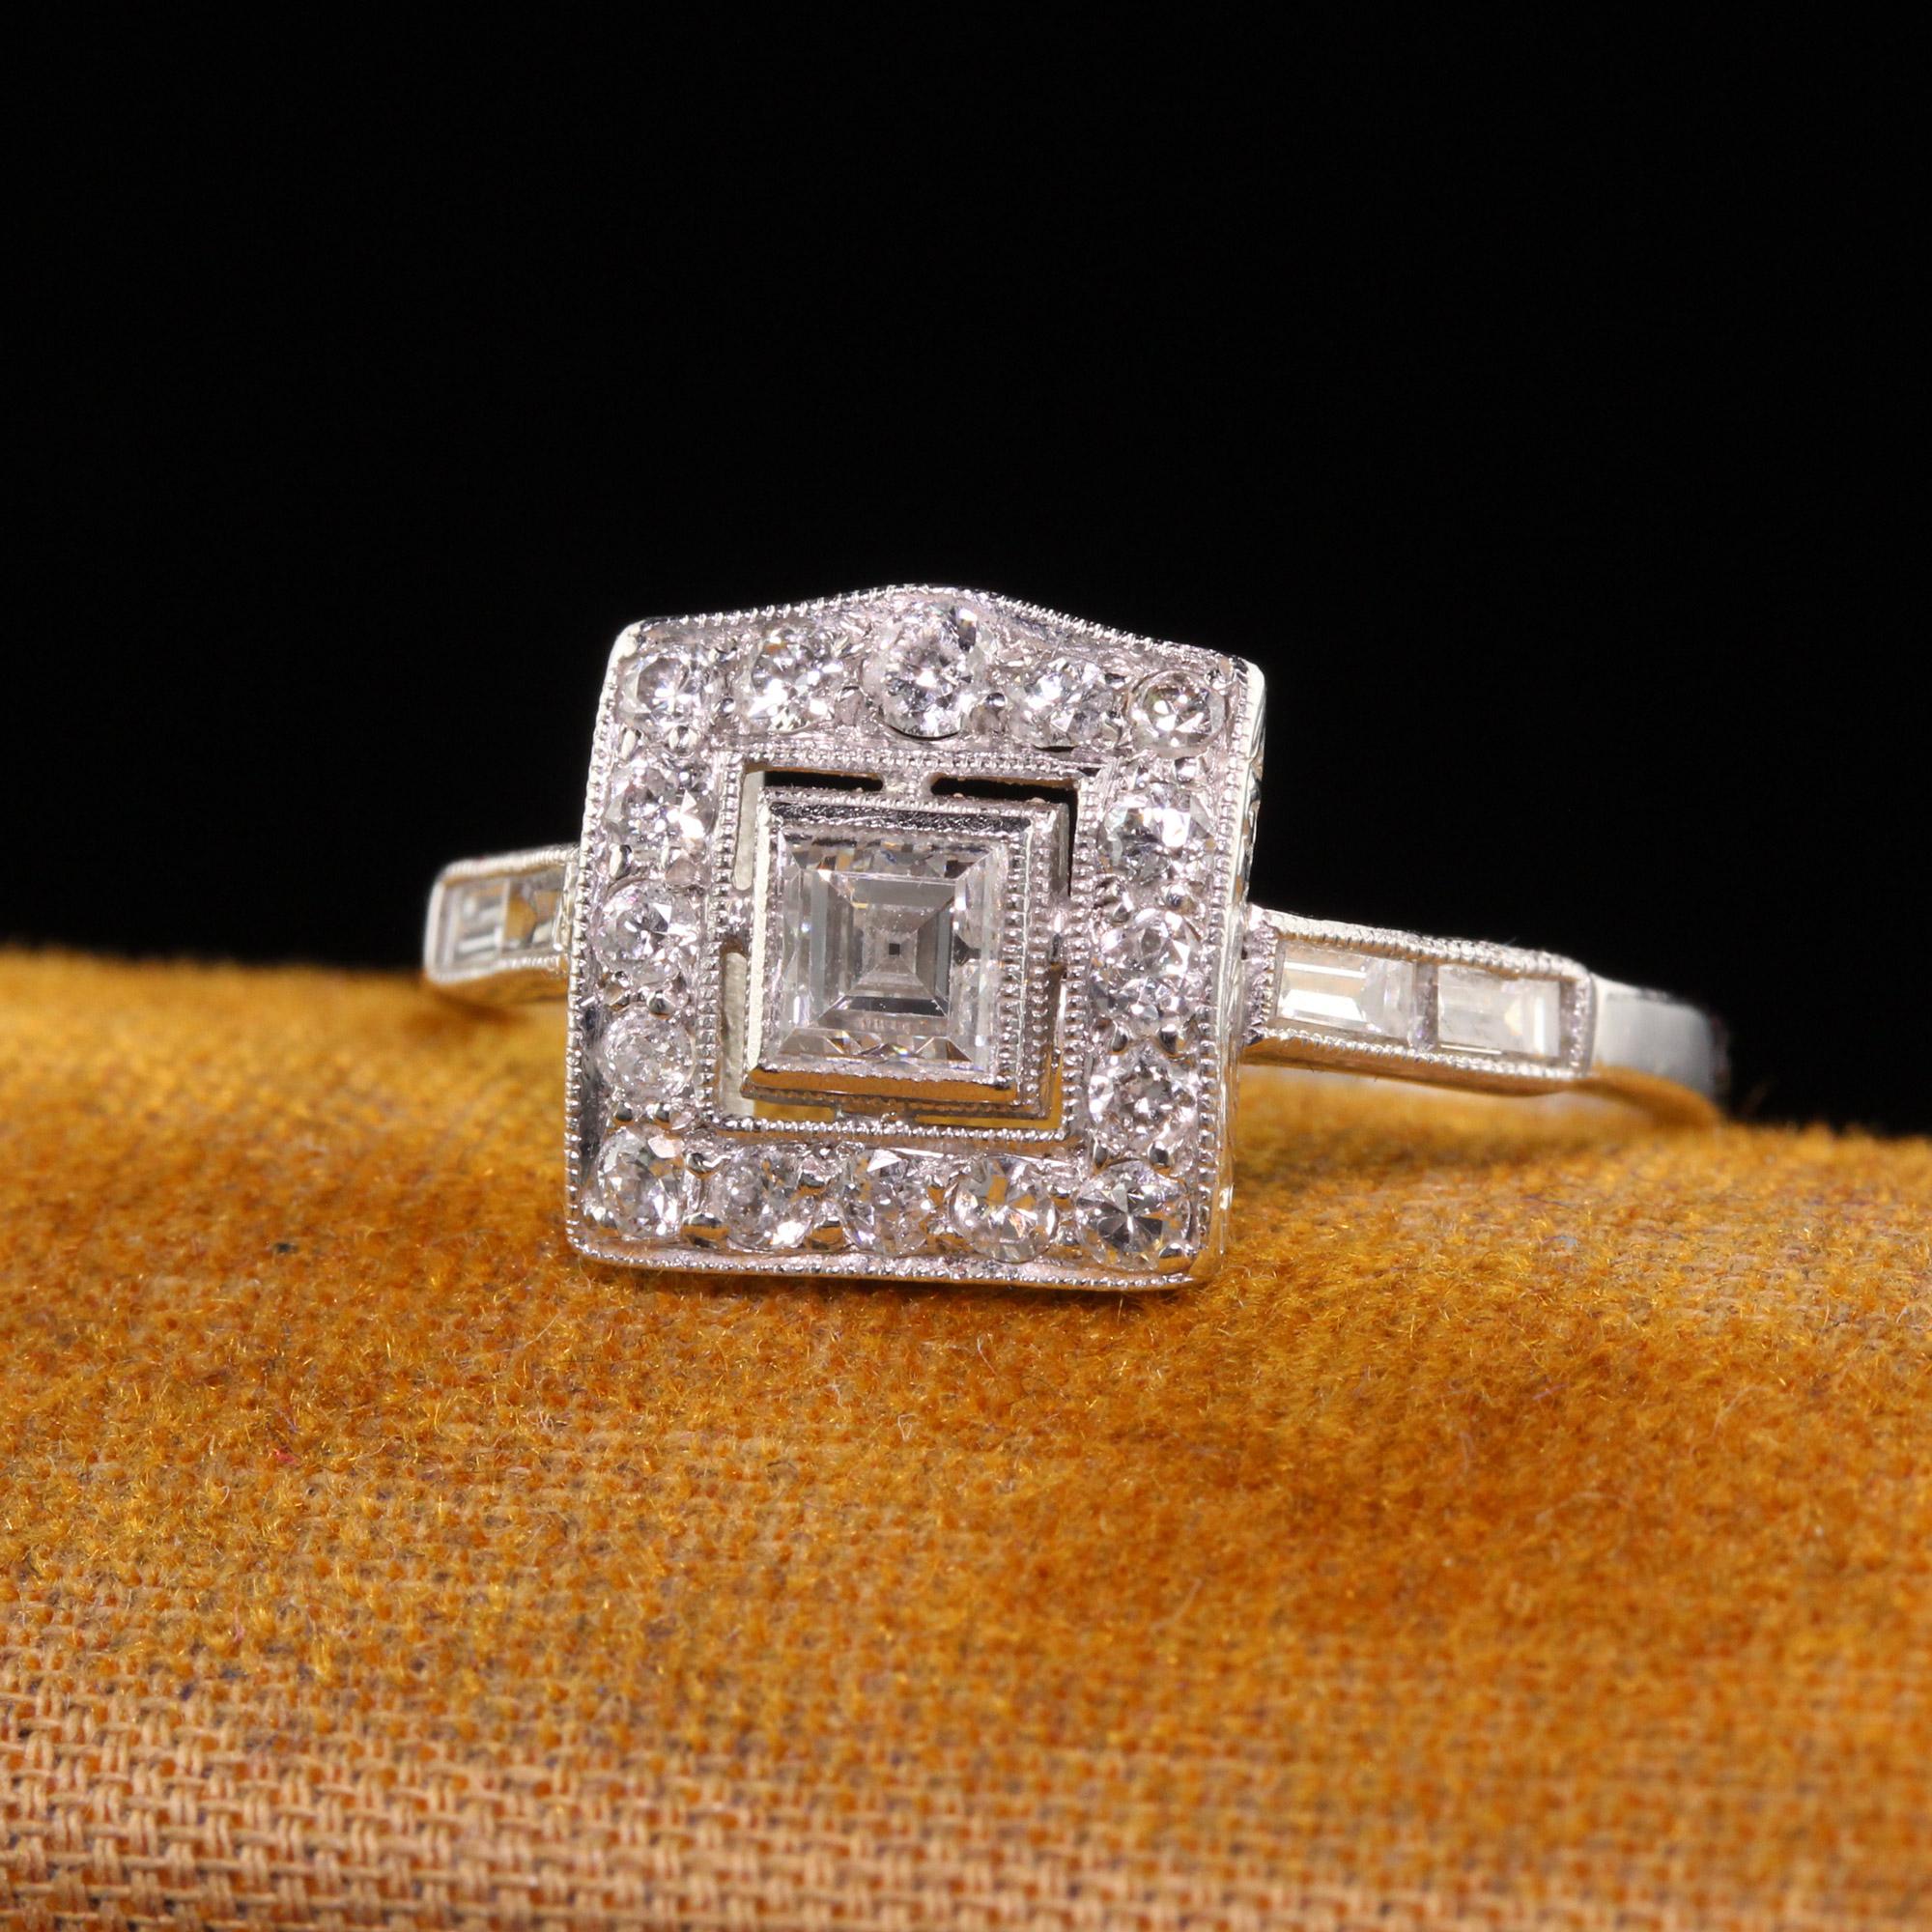 Beautiful Antique Art Deco Platinum Carre Cut Old European Diamond Engagement Ring. This beautiful engagement ring is crafted in platinum. The center holds a carre cut diamond and is surrounded by old european cut diamonds. This ring has an